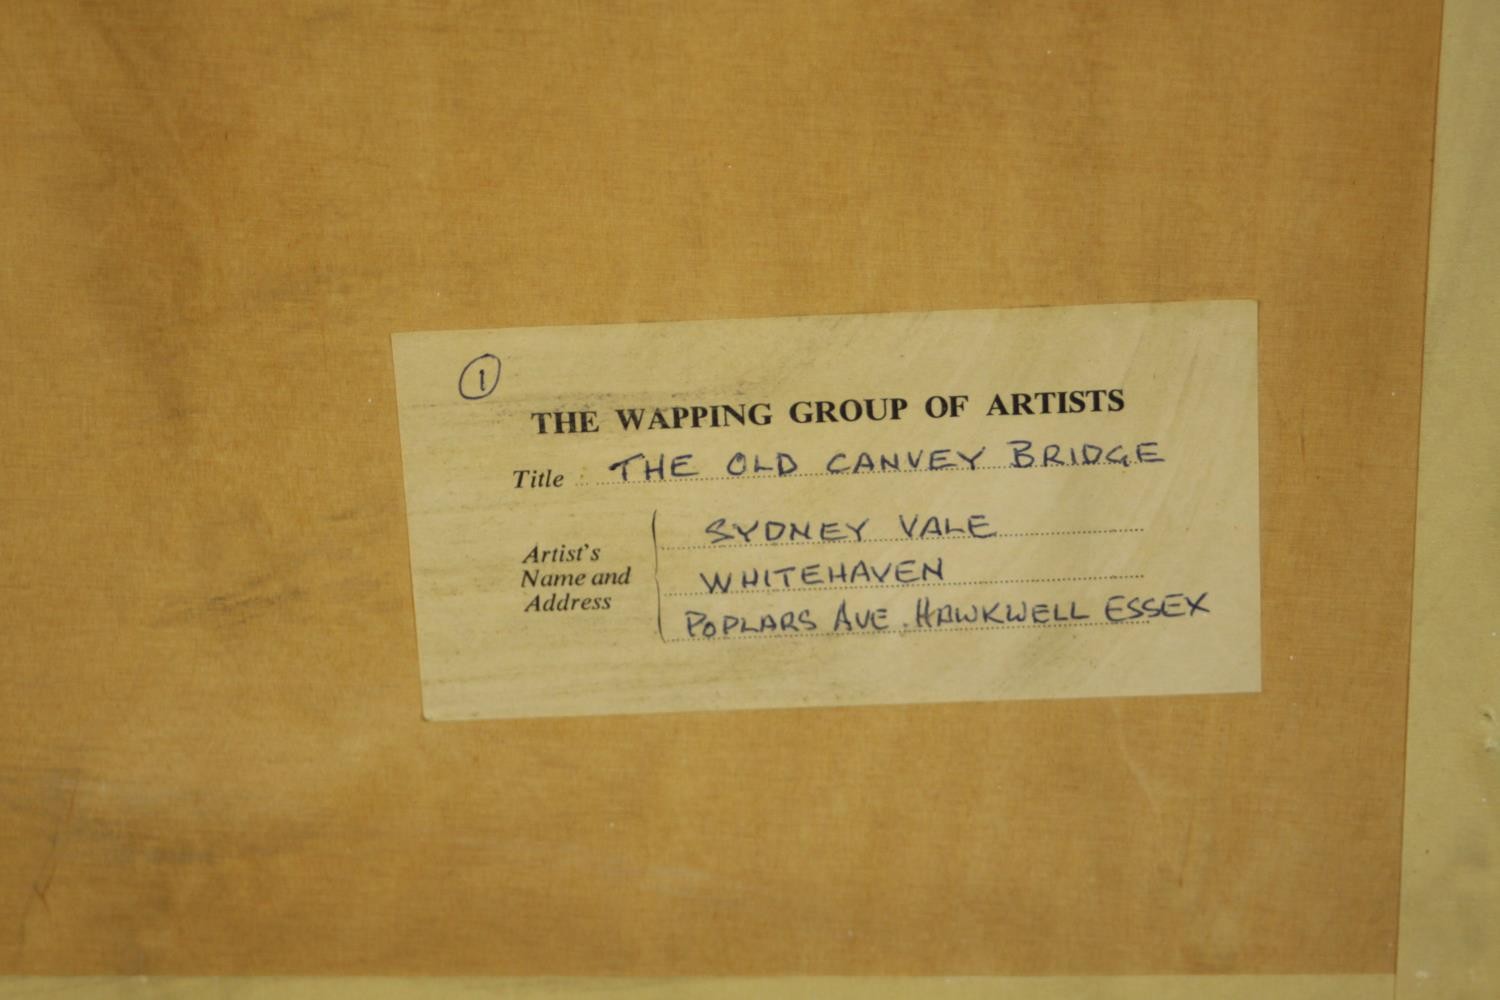 Sydney Vale (1916-1991); The Old Canvey Bridge, watercolour on paper, signed, label verso and - Image 7 of 7